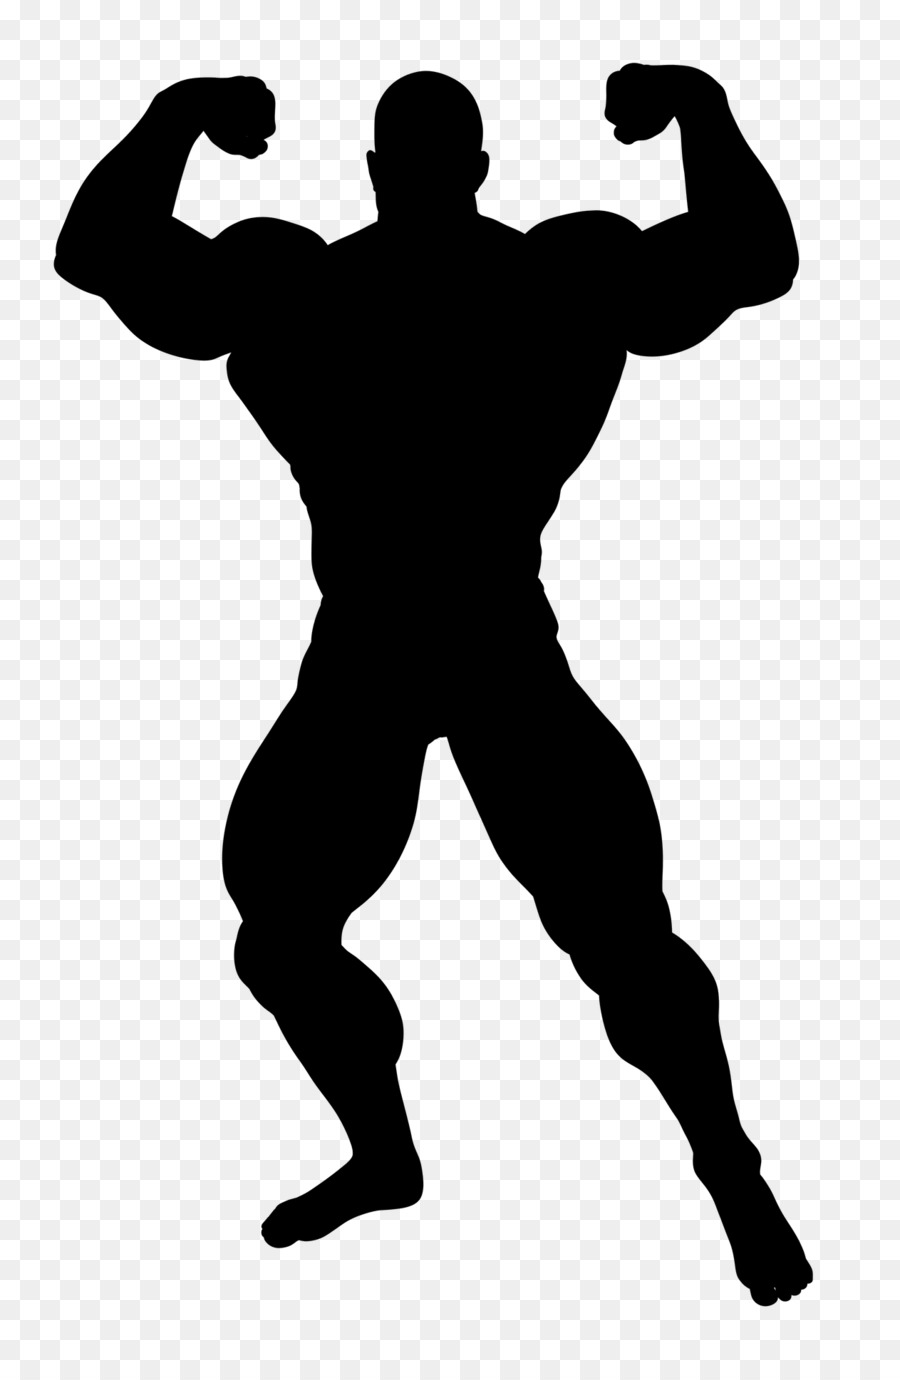 Muscle - others png download - 1263*1920 - Free Transparent Muscle png Download.